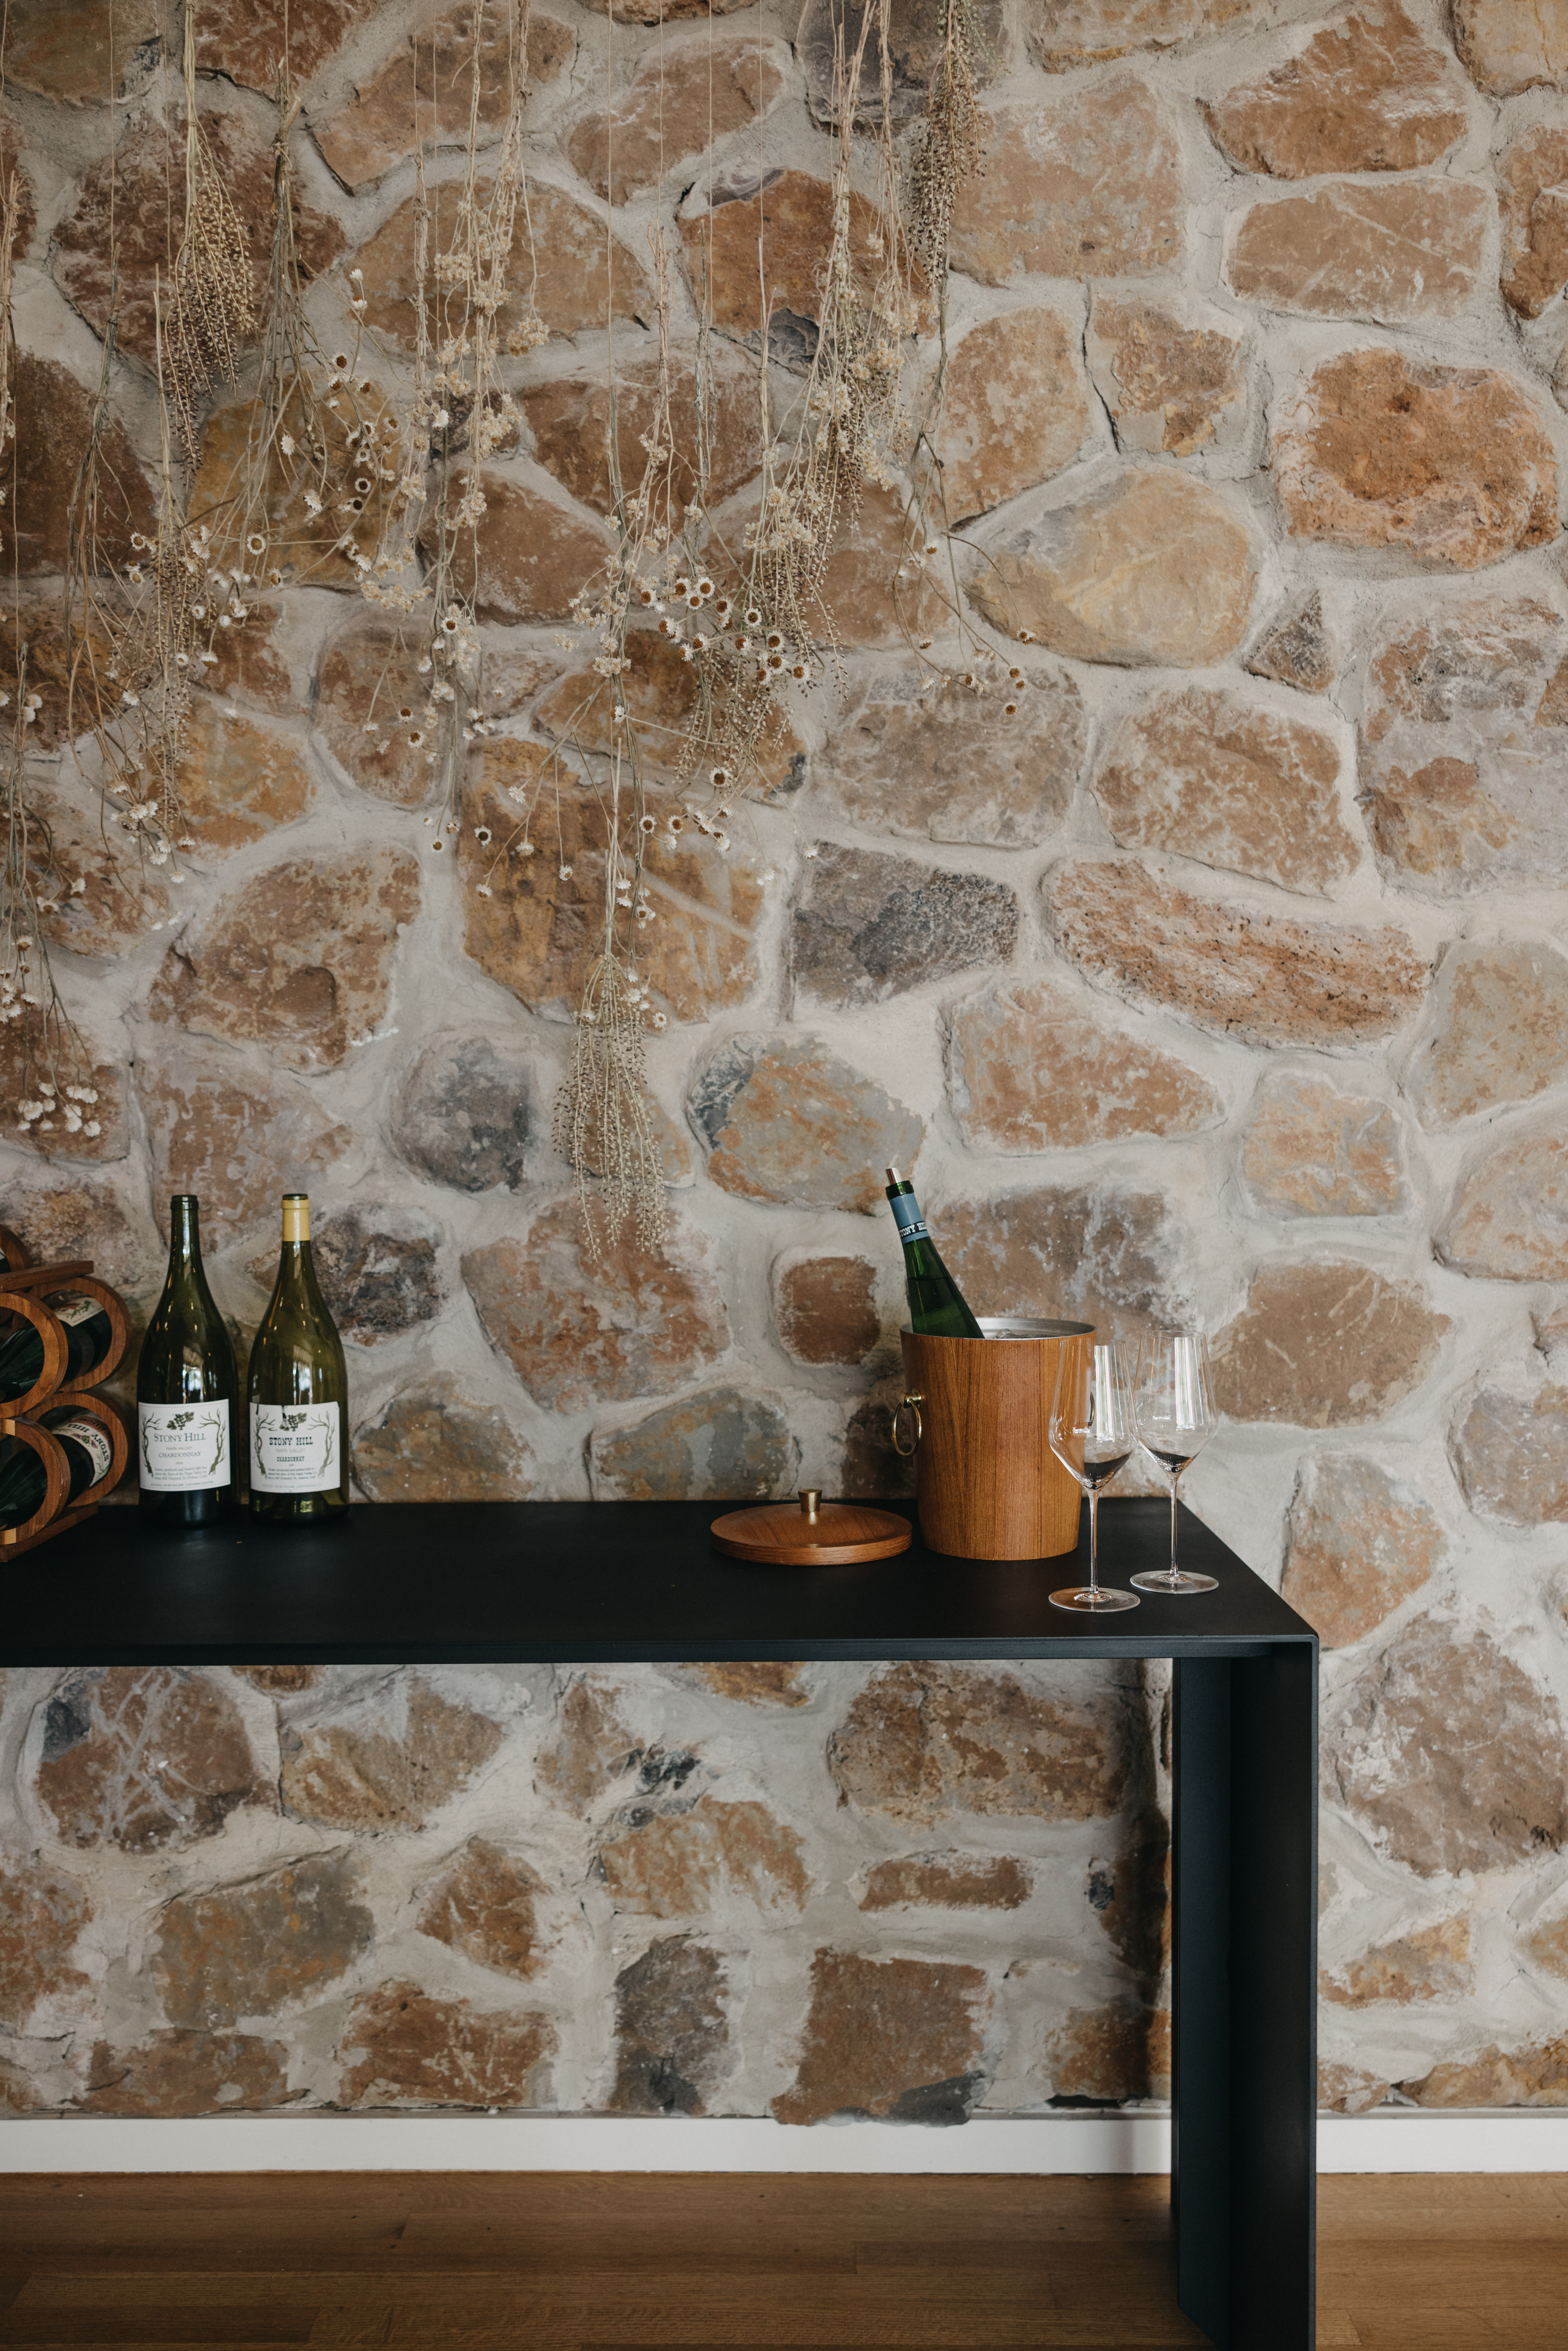 A stone wall with a table in front, two bottles of Stony Hill wines on the table, with another bottle of Stony Hill in a ice bucket and a glass of wine next to it.